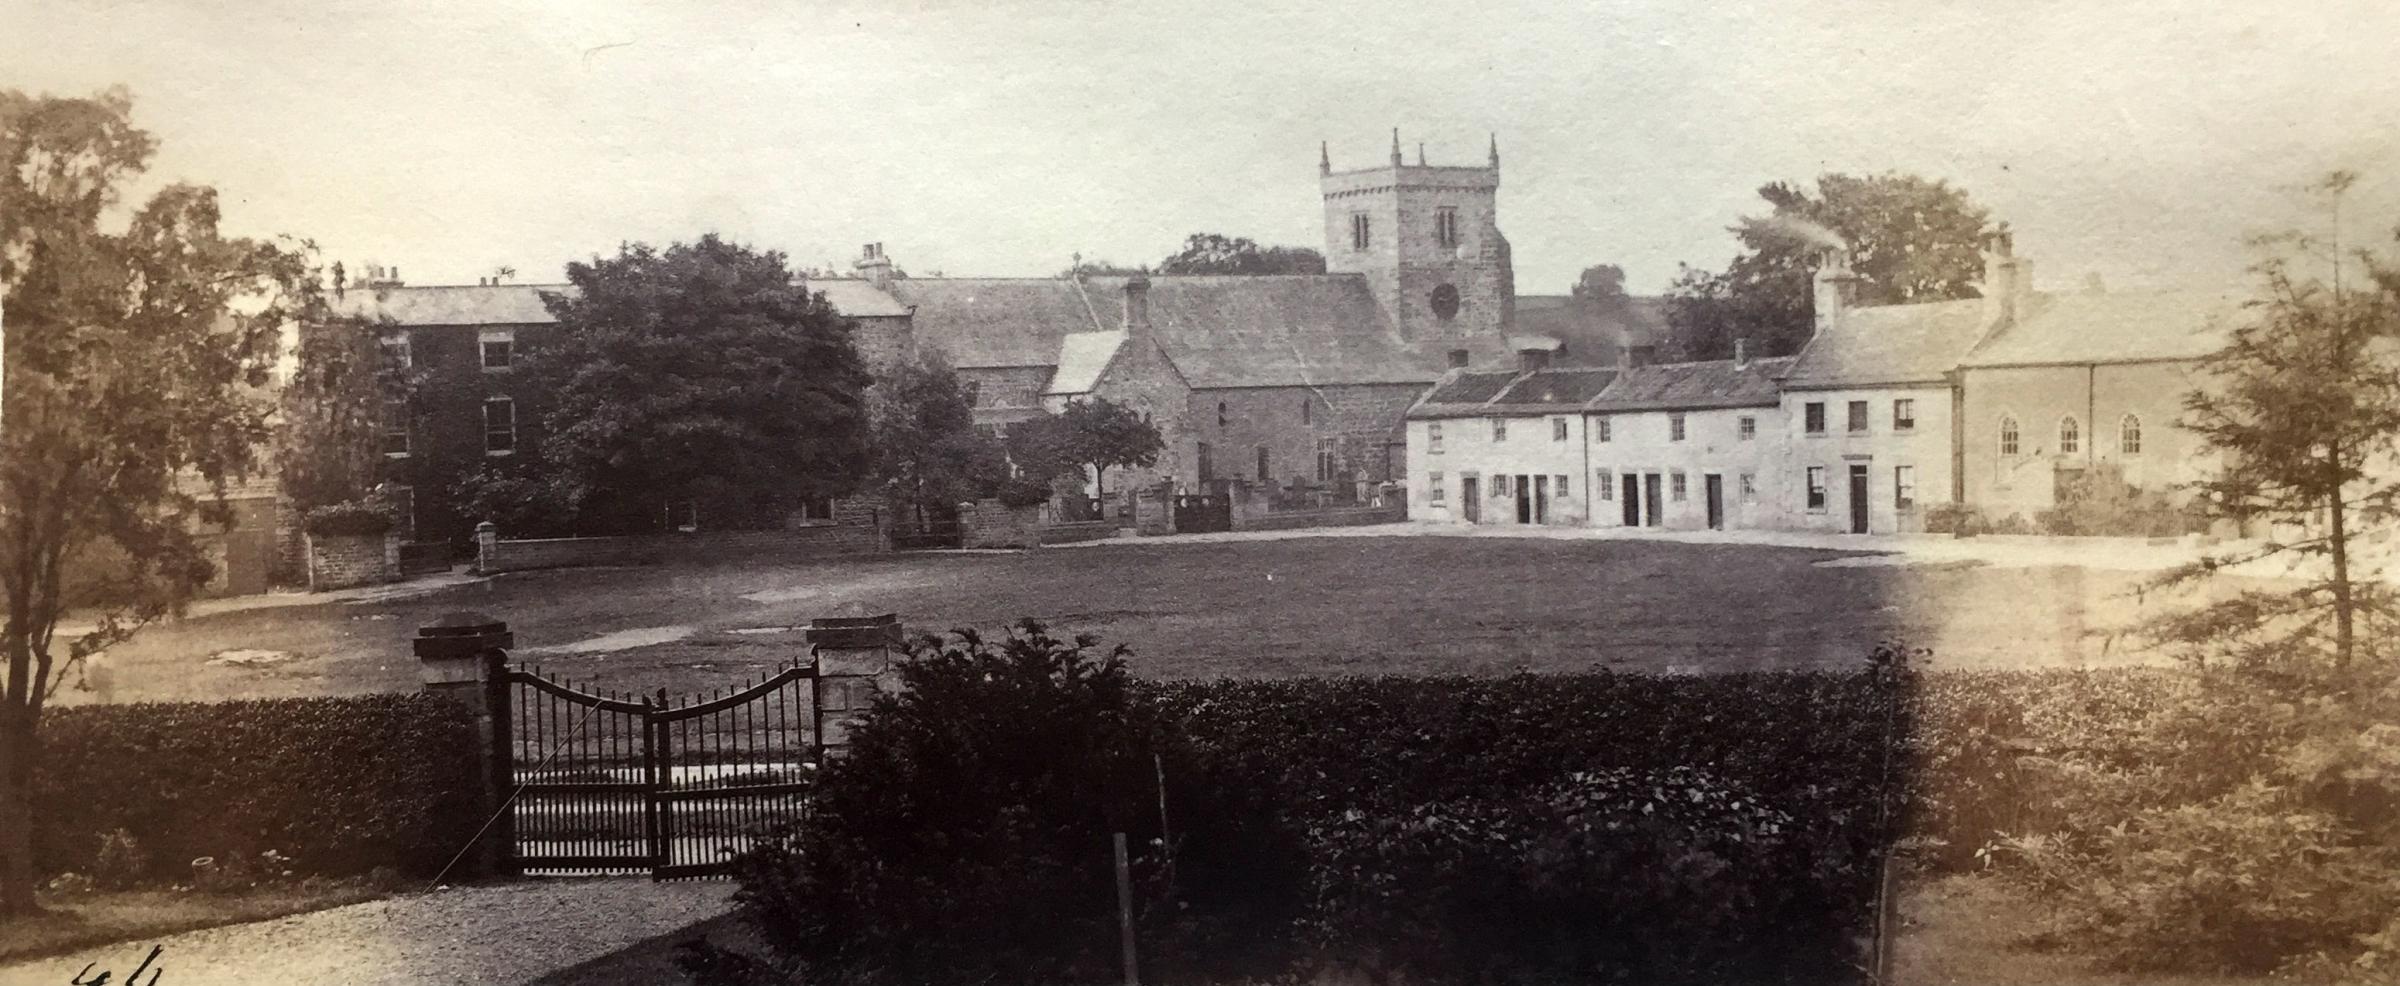 Looking across the green to Gainford church in the 1880s